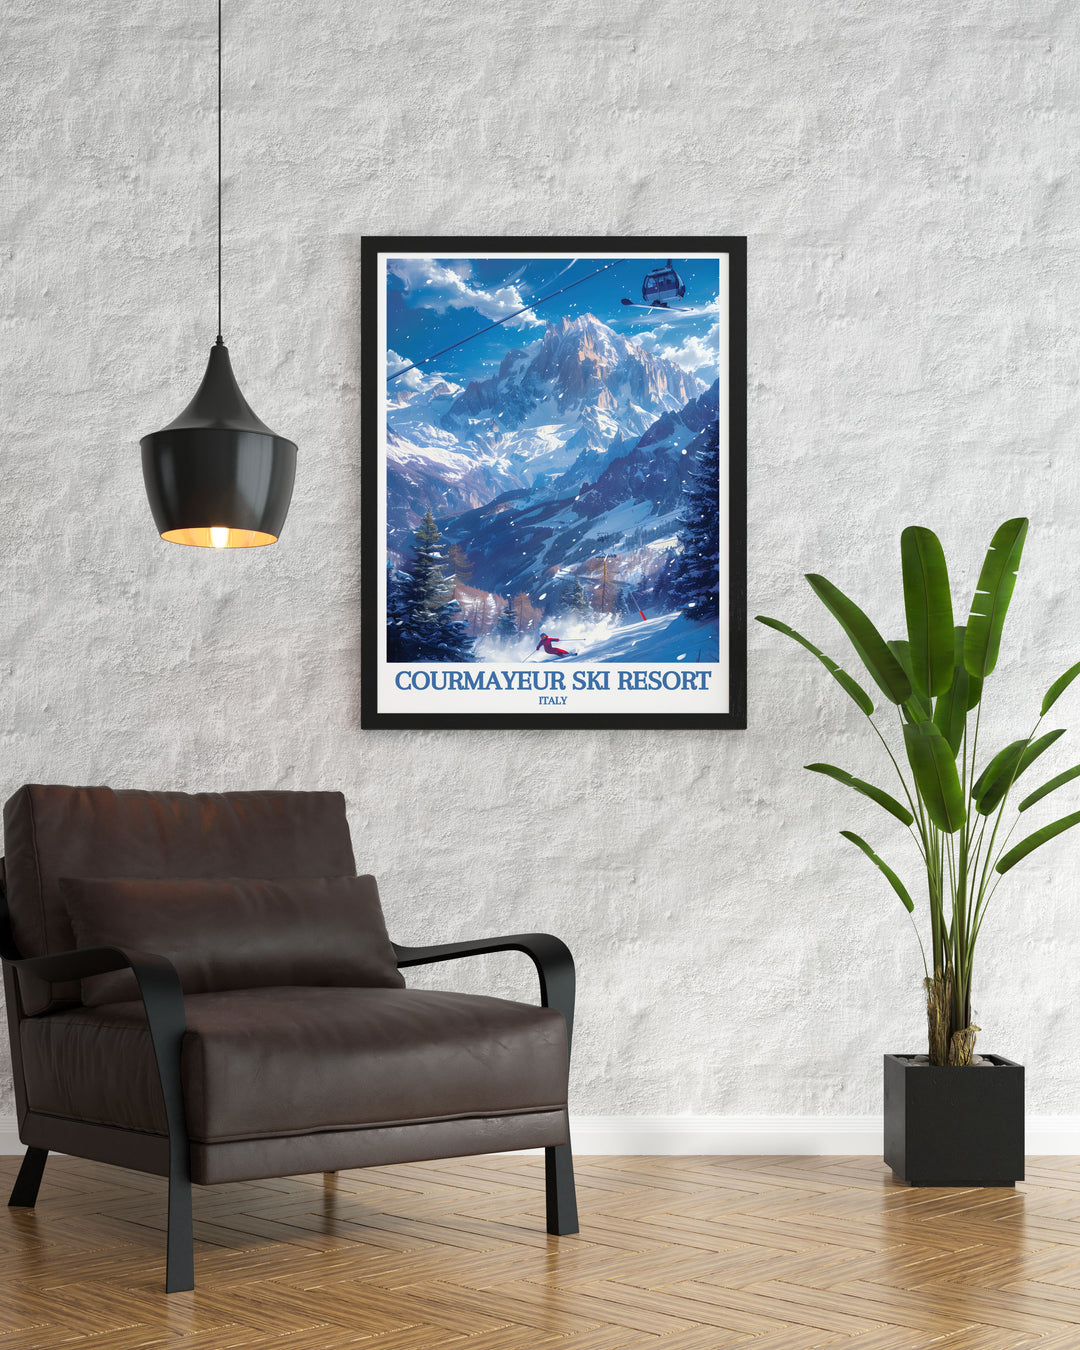 Showcasing the lush landscapes of the Italian Alps and the thrill of skiing in Courmayeur, this poster is ideal for art lovers who appreciate the diverse and stunning beauty of Italy.